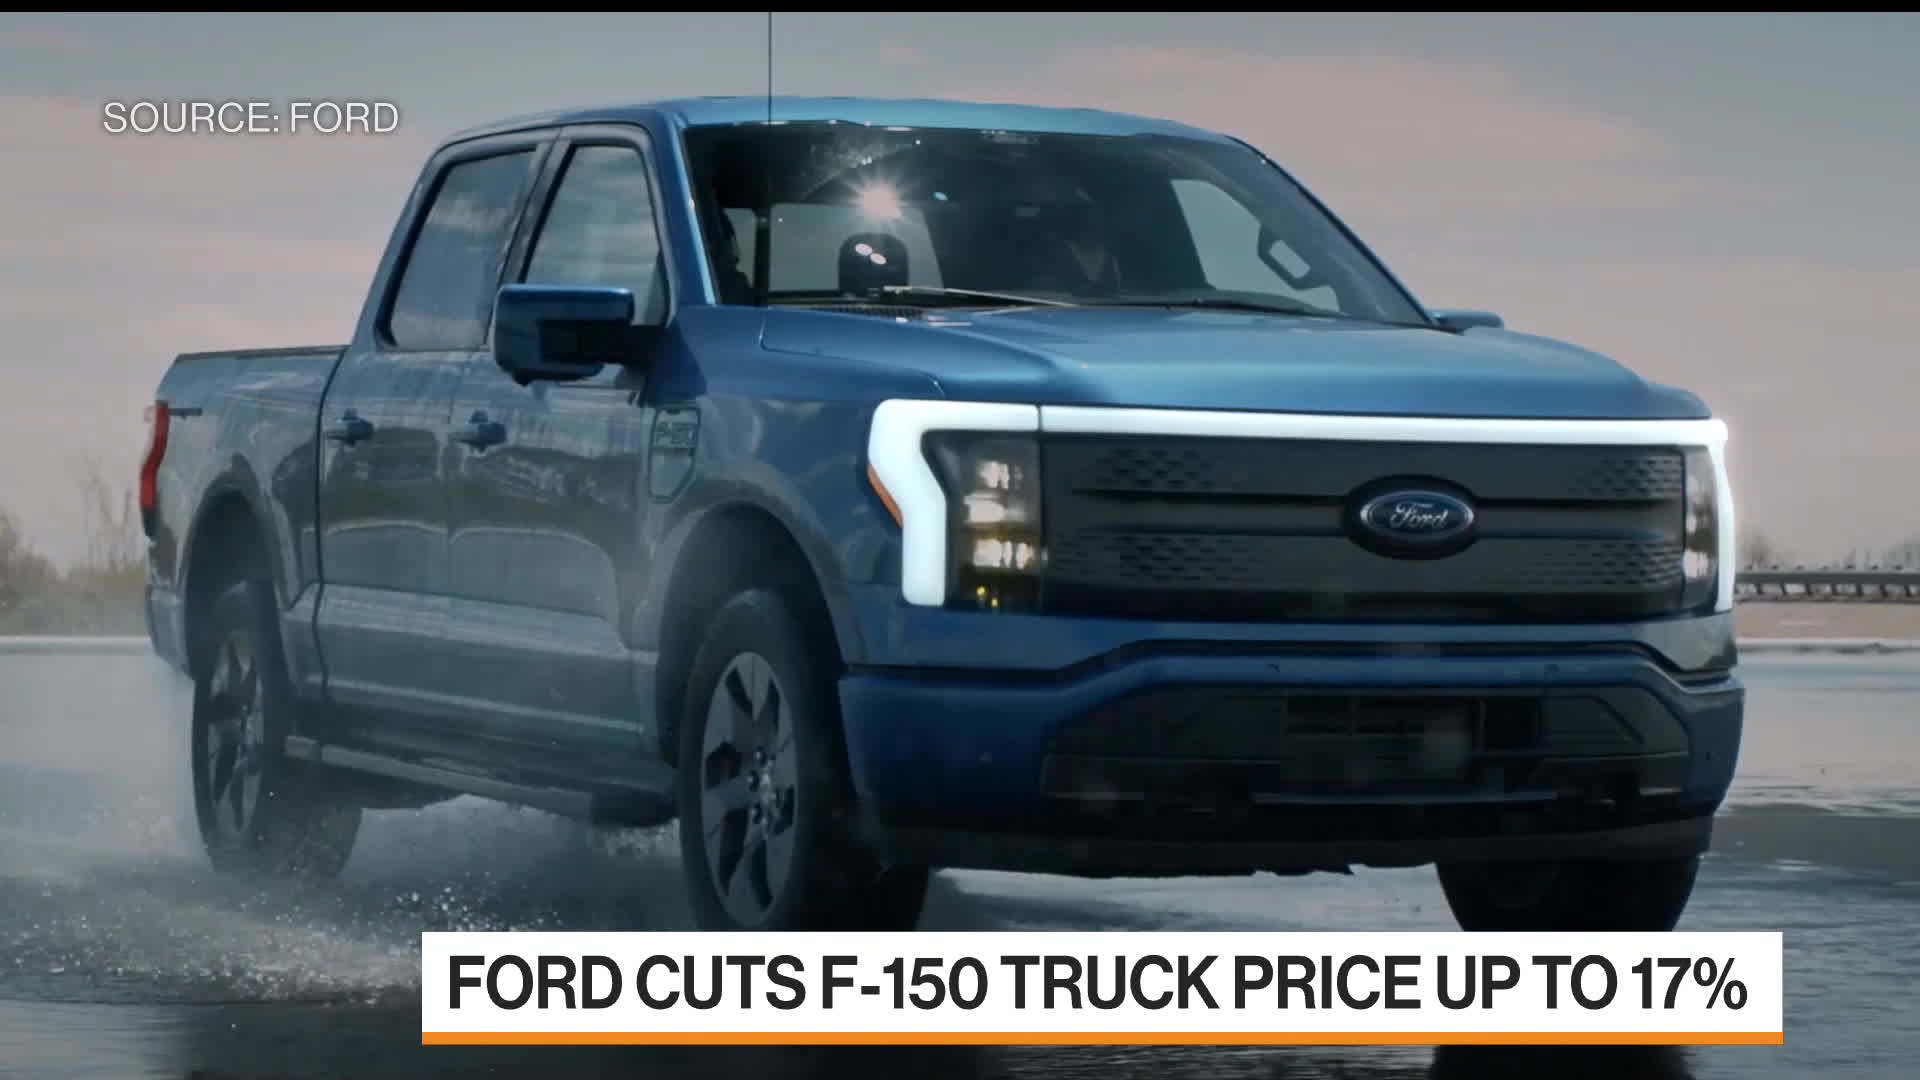 Ford kills some F-150 Lightning trims, raises prices on others